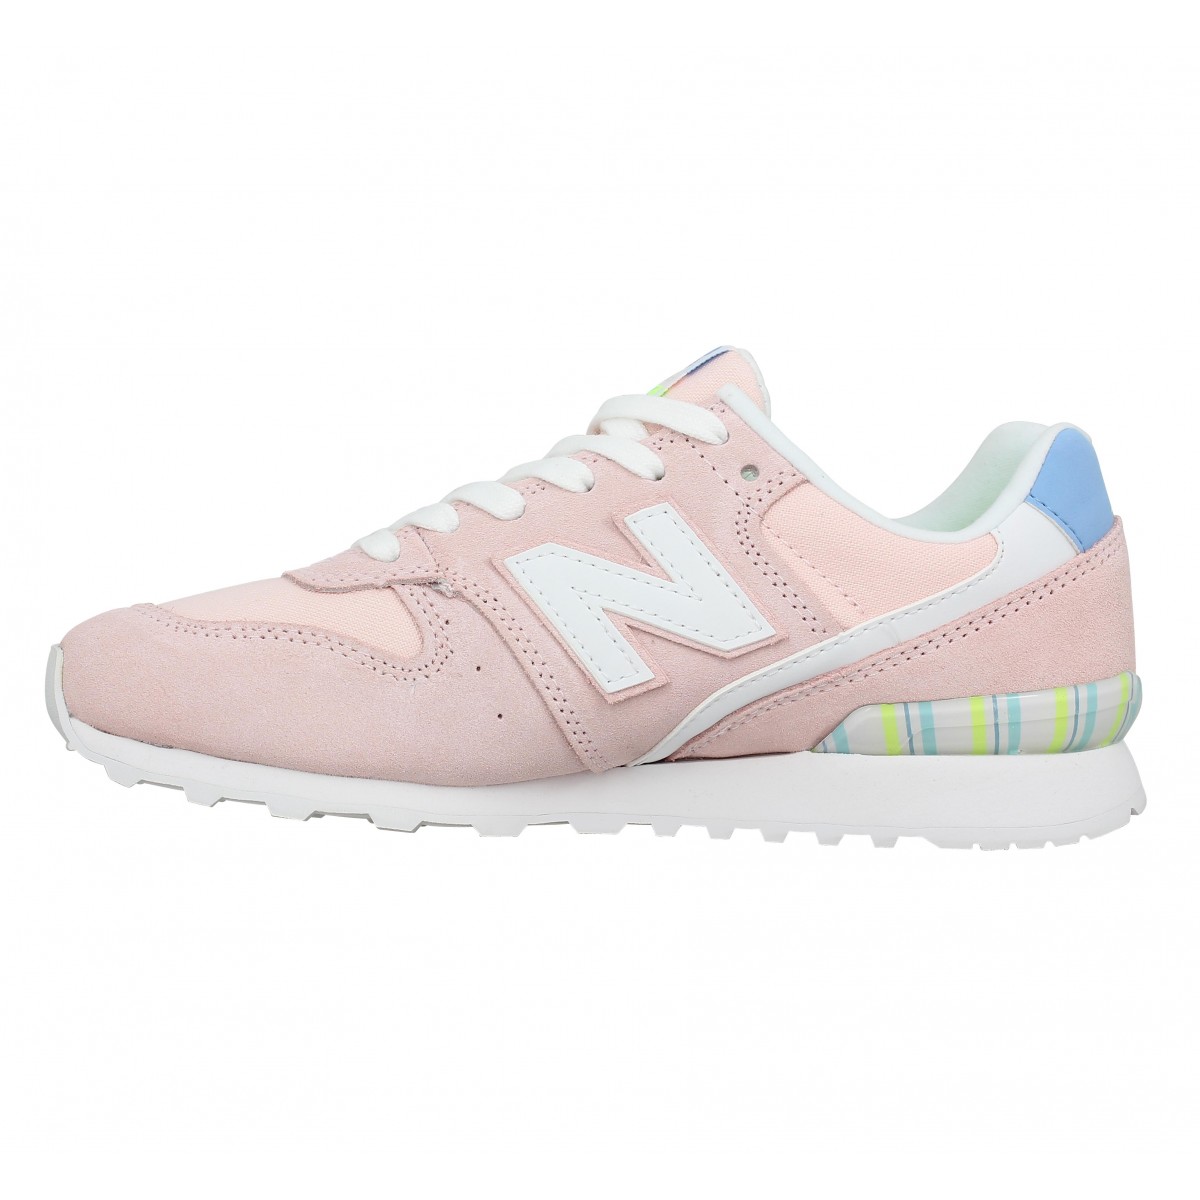 Chaussures New balance 996 femme rose femme | Fanny chaussures